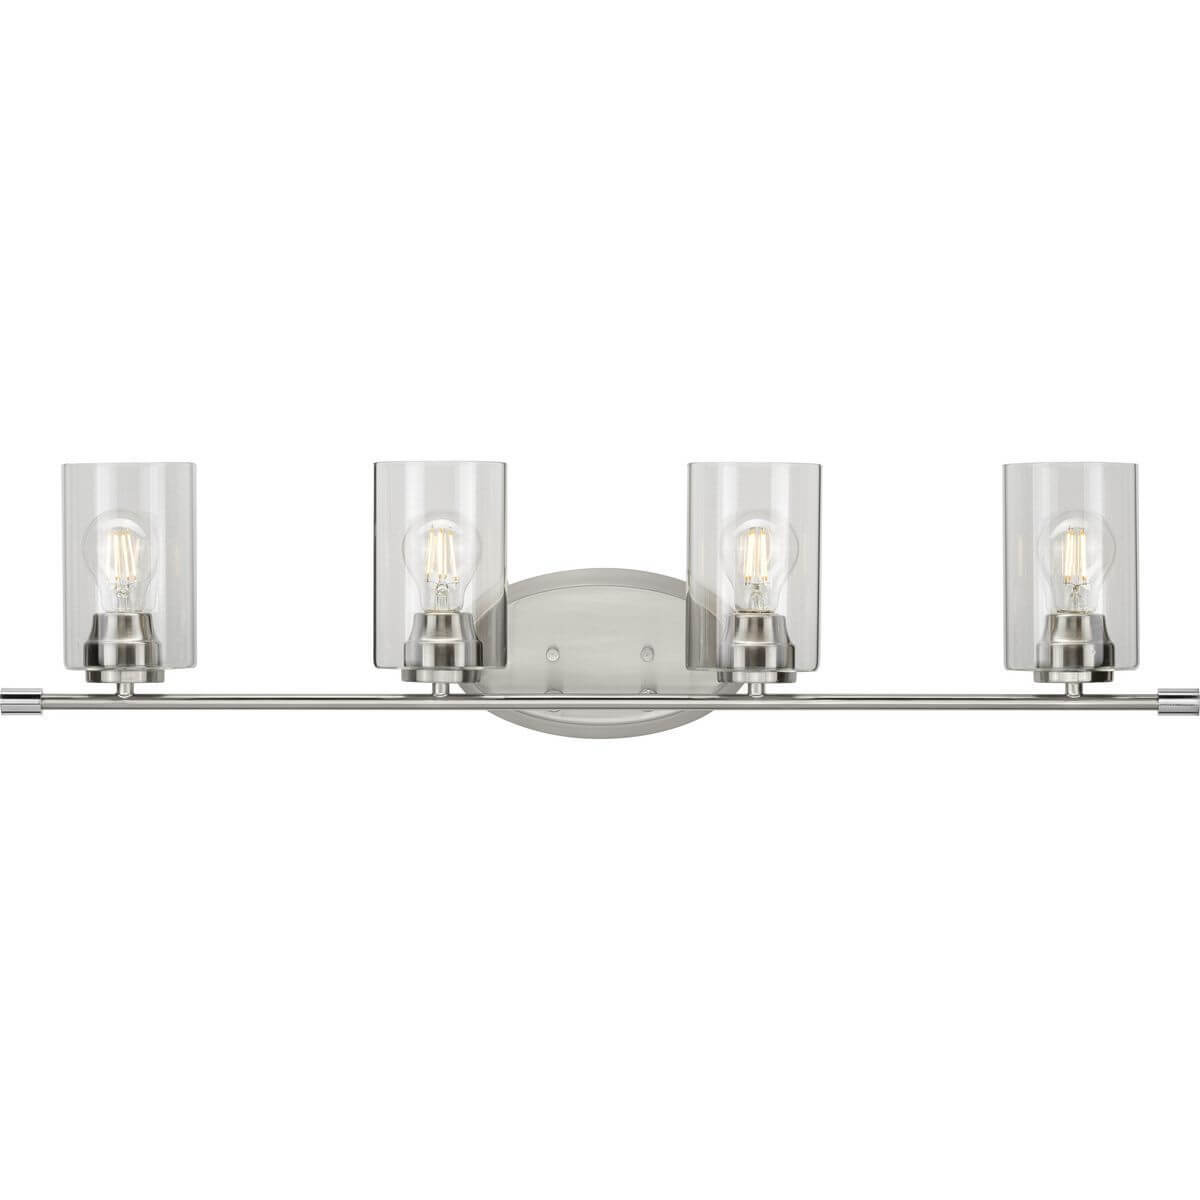 Progress Lighting Riley 4 Light 34 inch Bath Vanity Light in Brushed Nickel with Clear Glass P300279-009